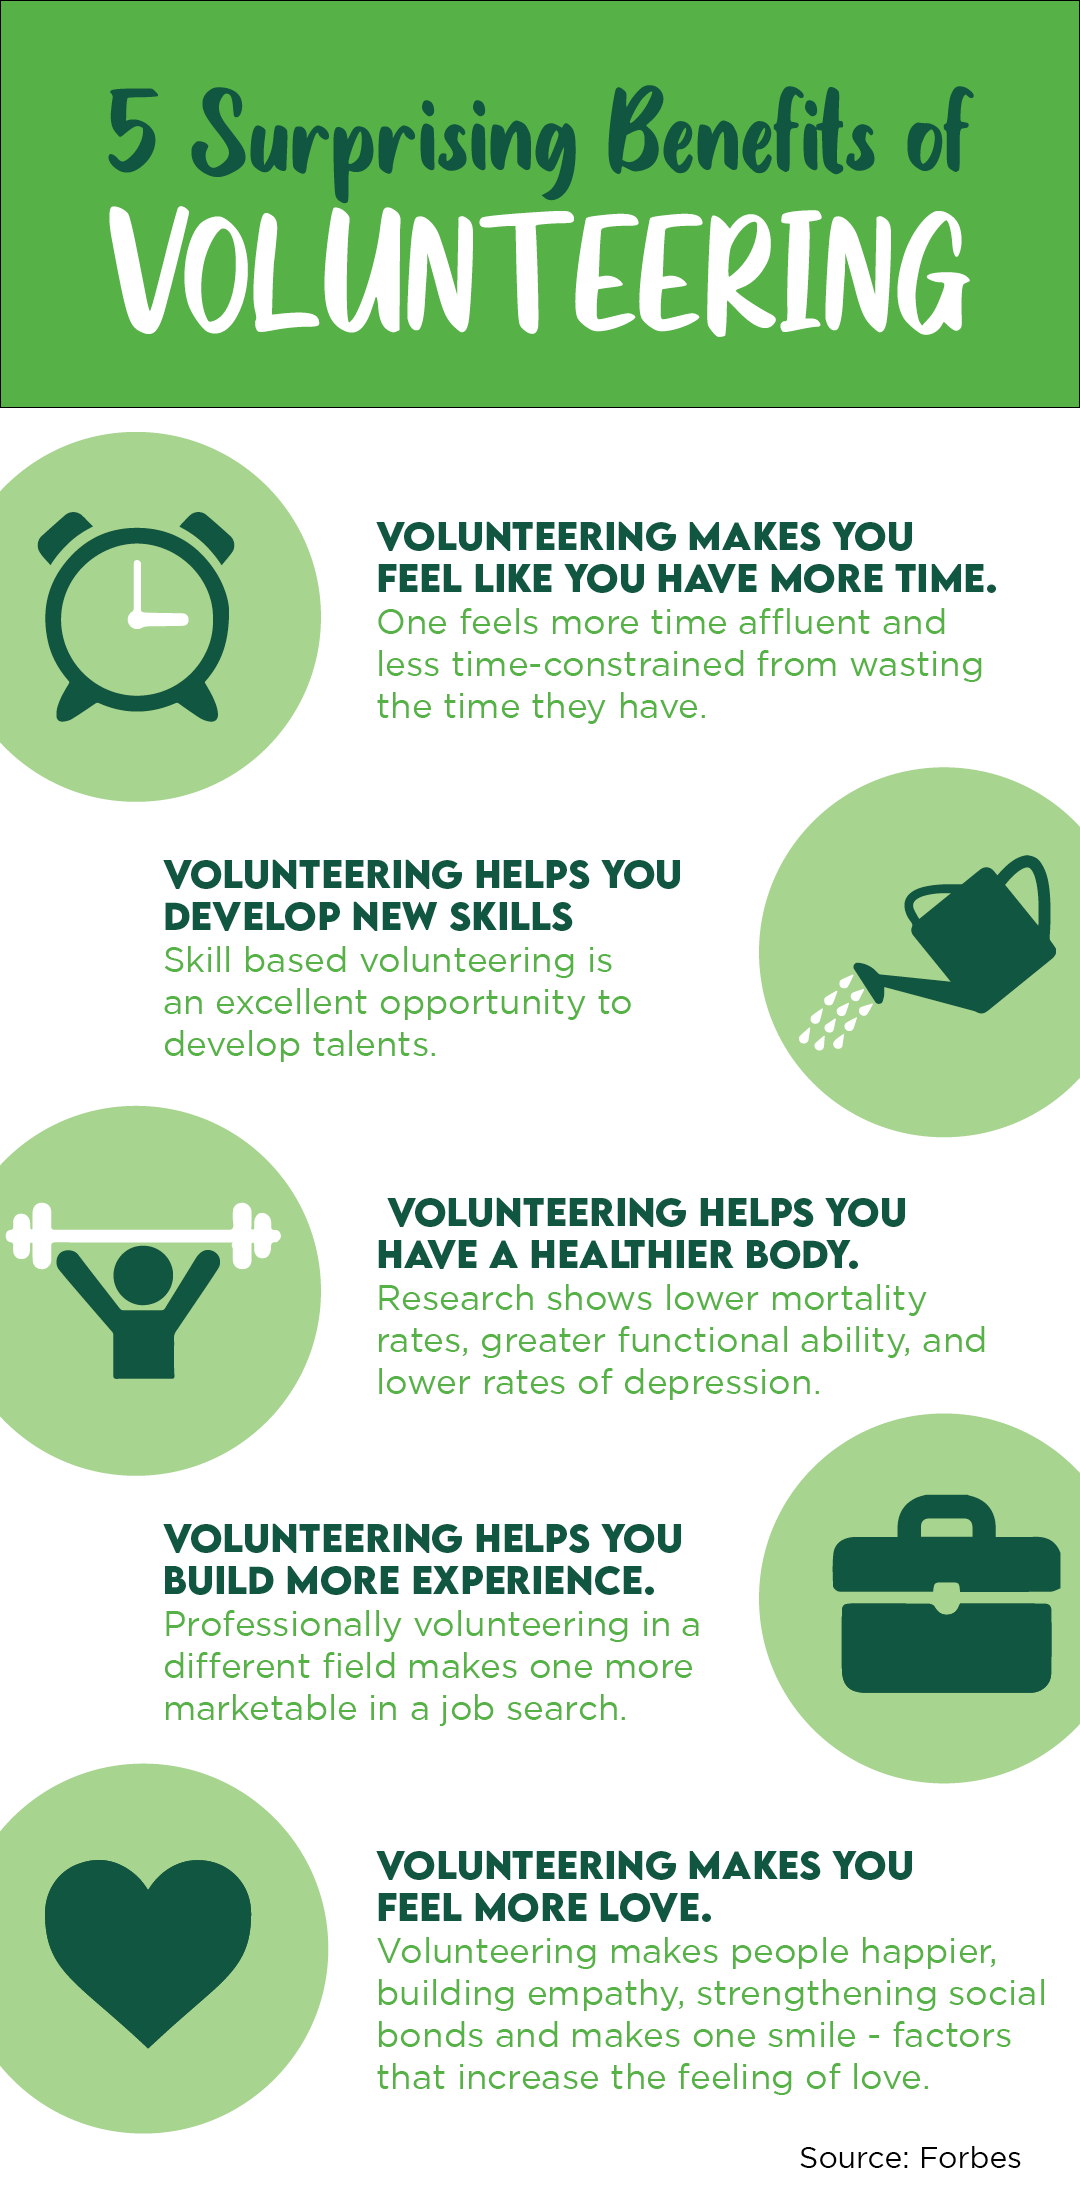 5 Surprising Benefits of VOLUNTEERING | Volunteering makes you feel like you have more time. One fee